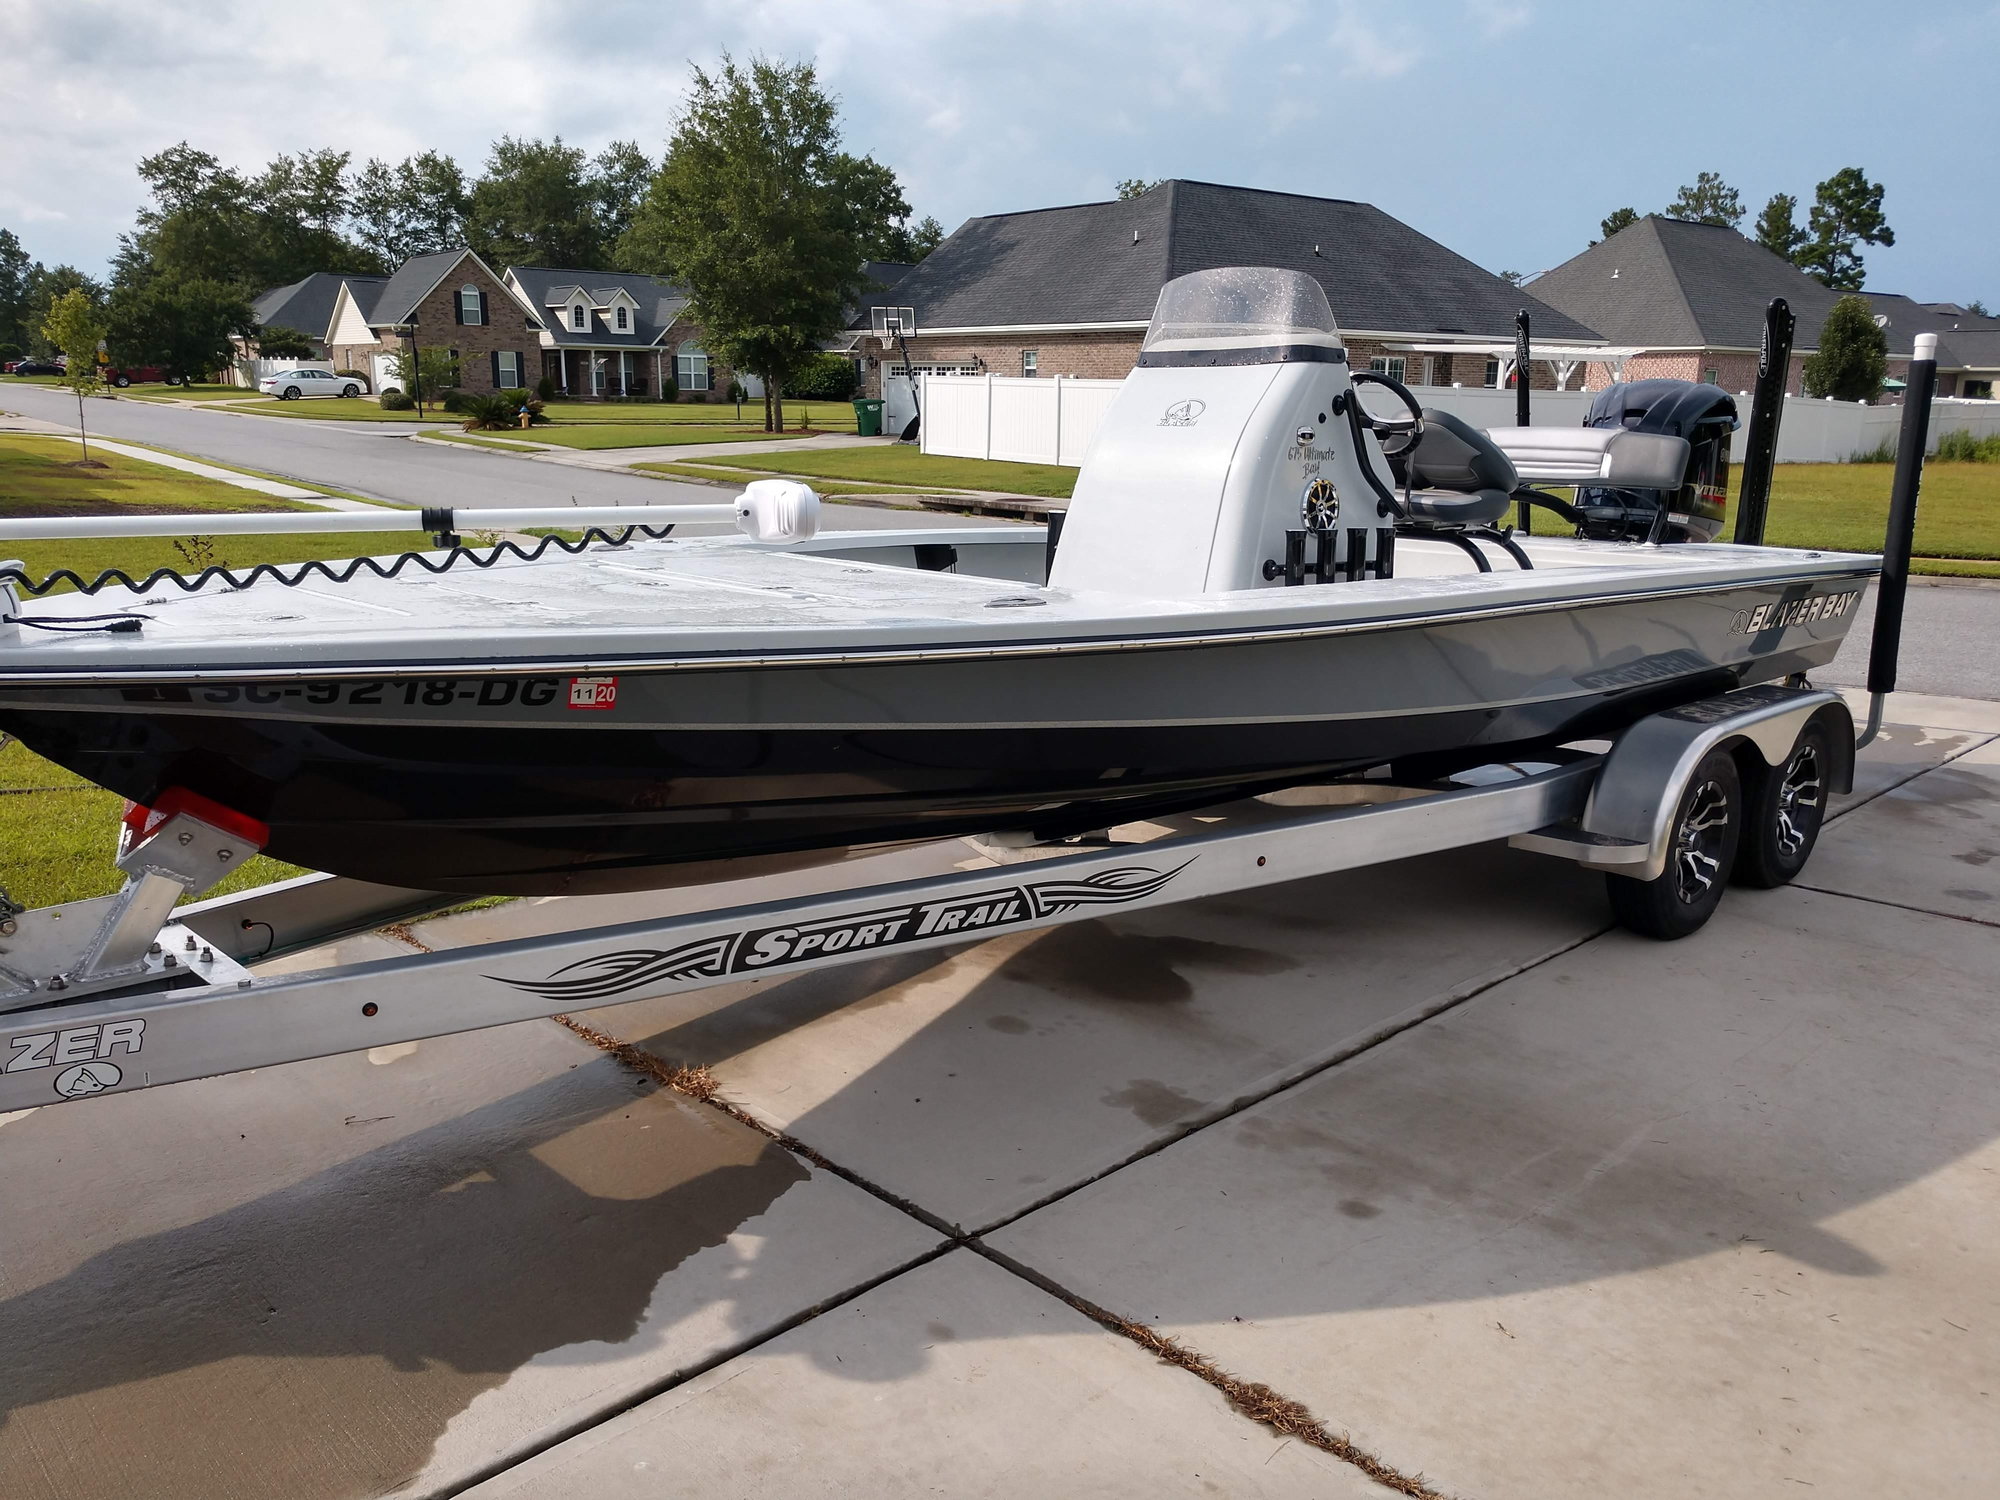 2016 blazerbay Ultimate 675 - The Hull Truth - Boating and Fishing Forum